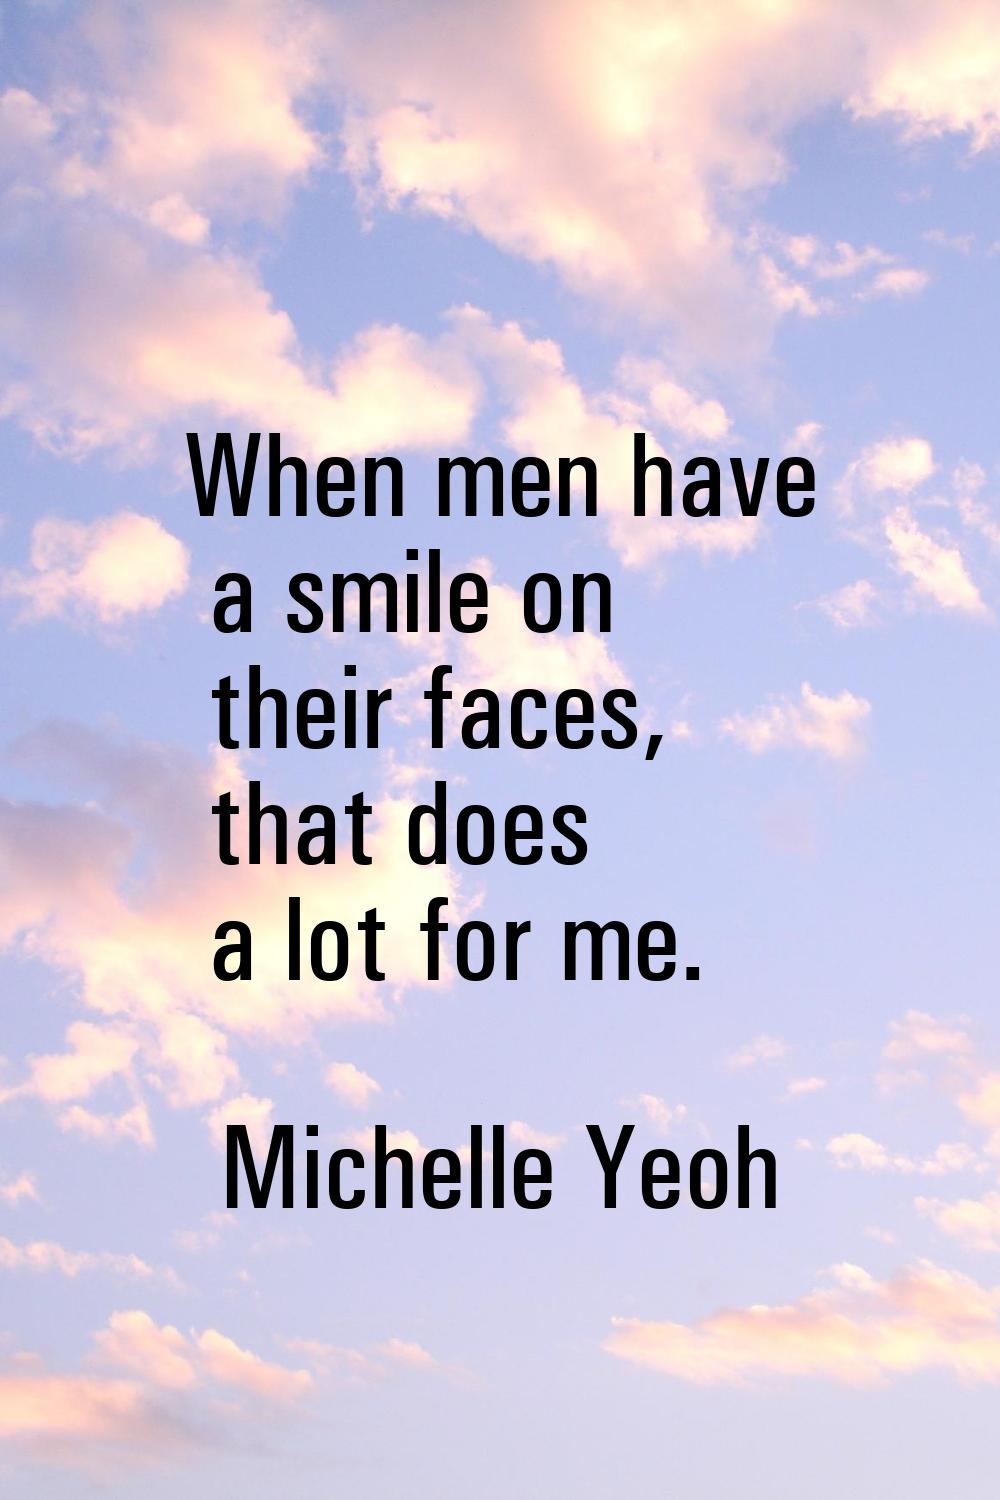 When men have a smile on their faces, that does a lot for me.